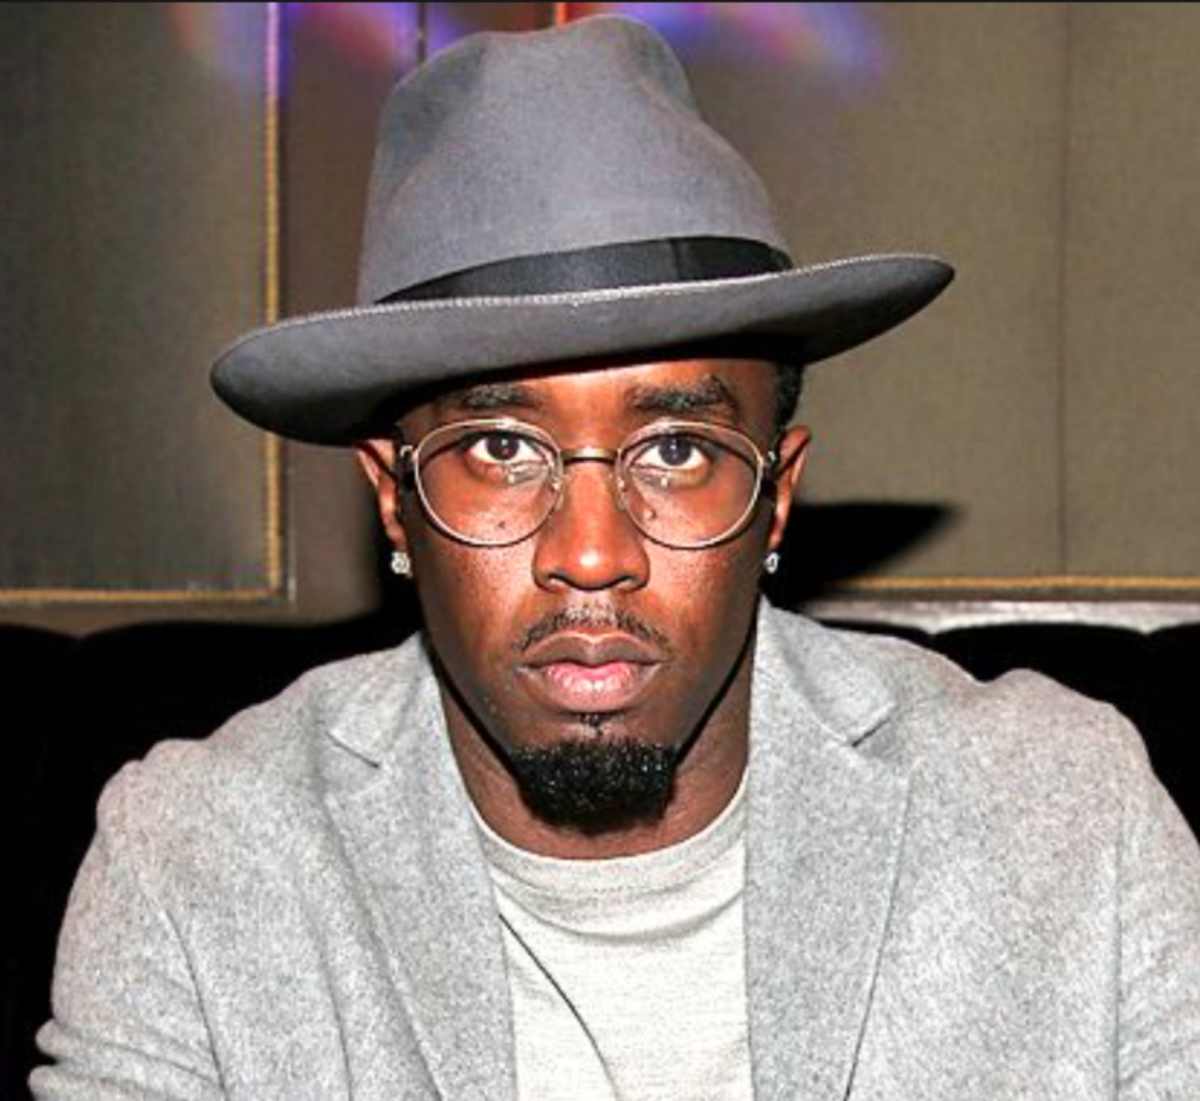 Sean+P+Diddy+Combs+maintains+controversial+space+in+his+media+presence.+